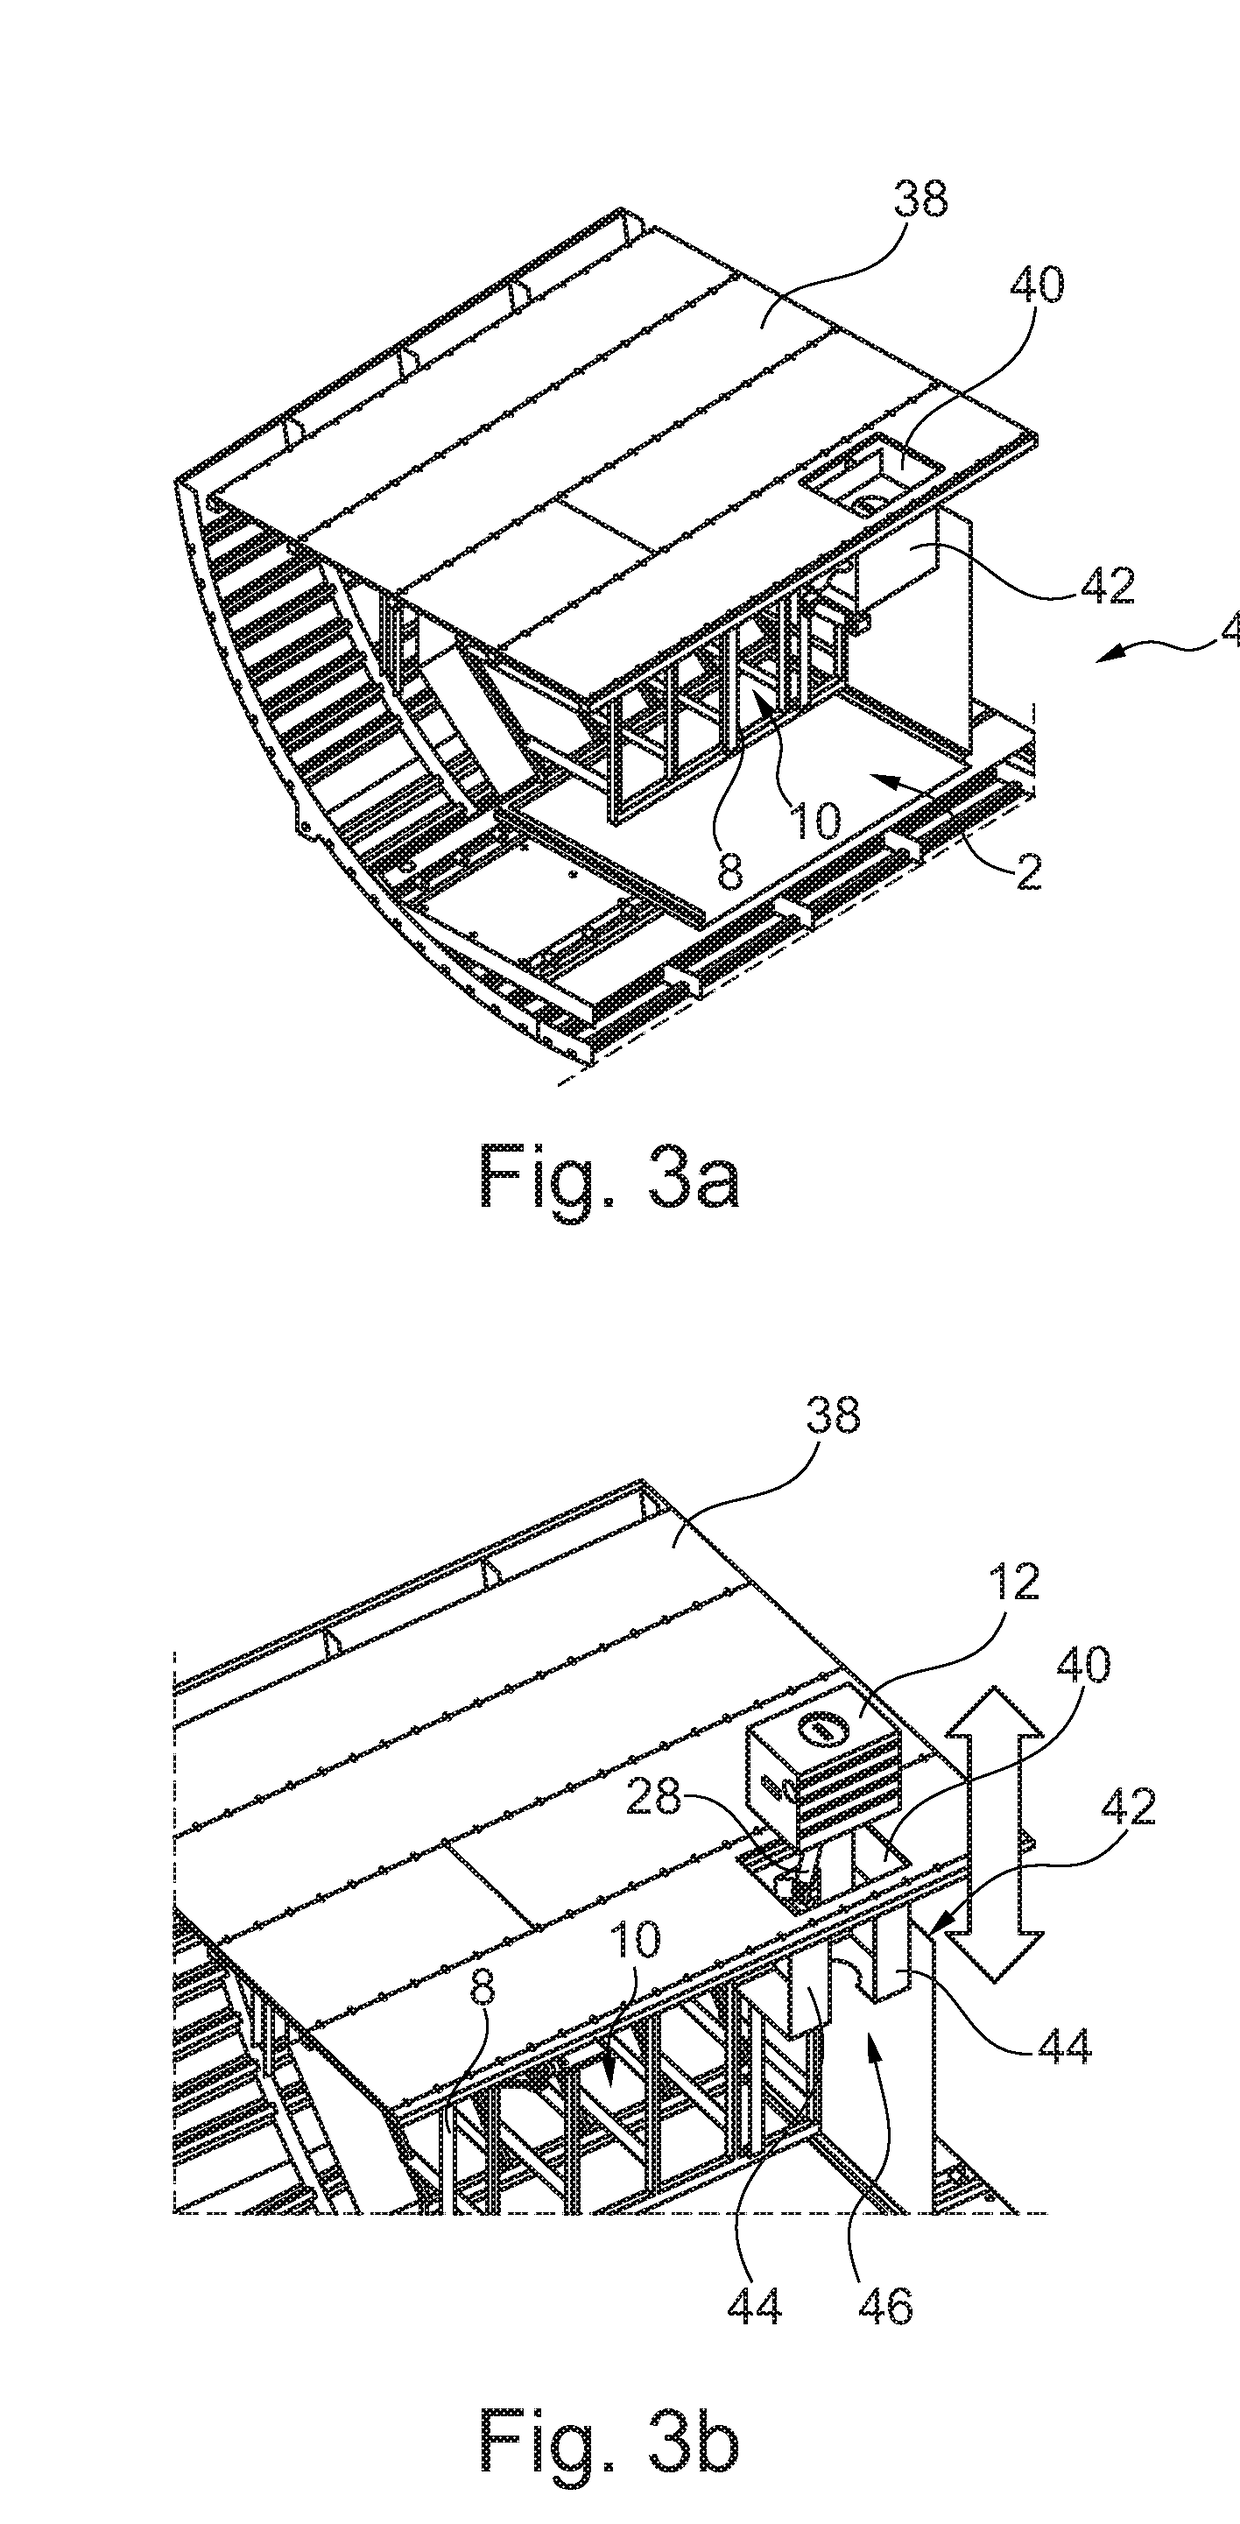 System for handling containers and other objects in a freight compartment of a vehicle